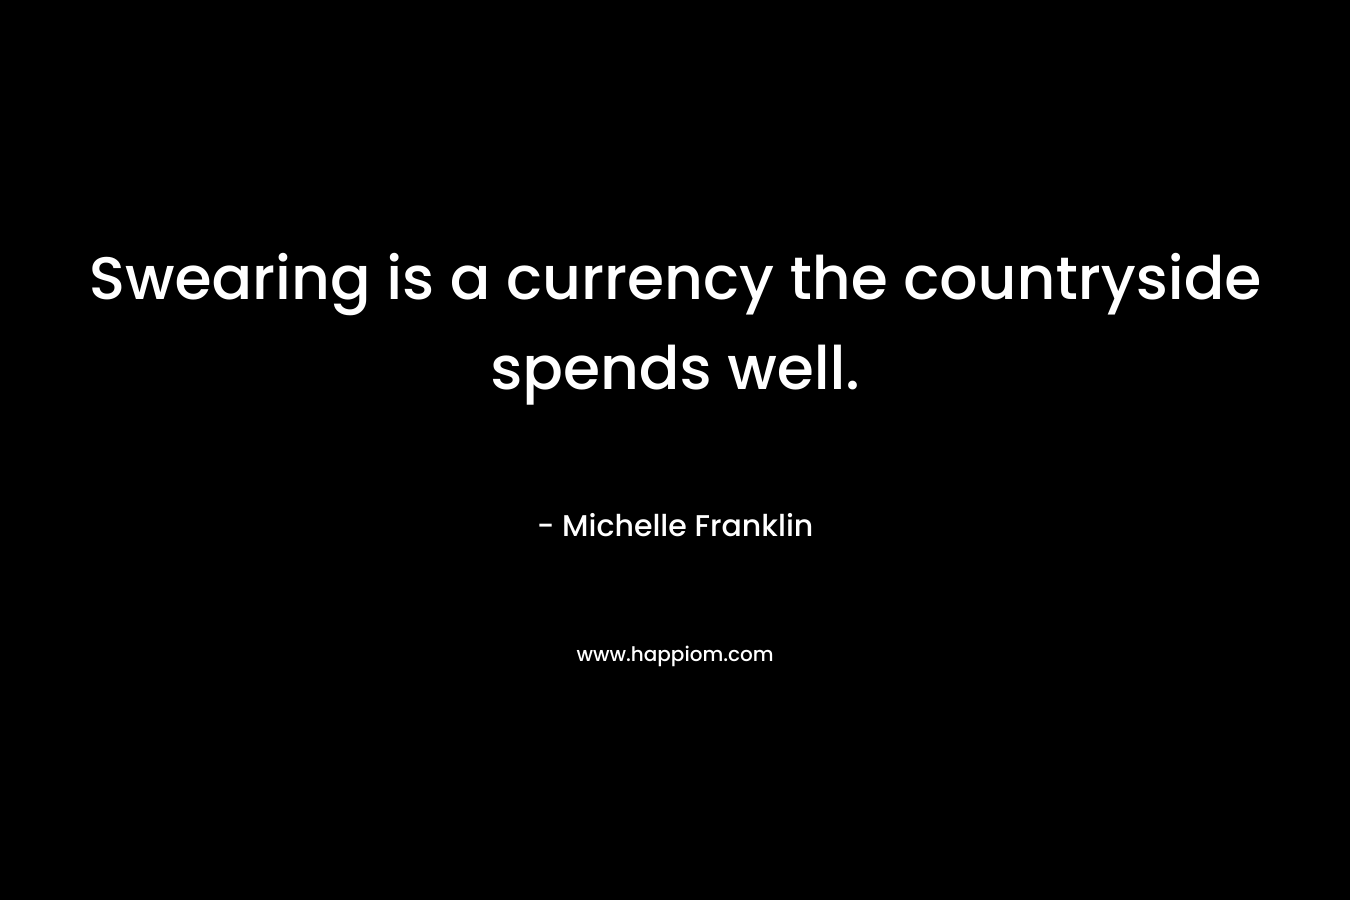 Swearing is a currency the countryside spends well. – Michelle Franklin